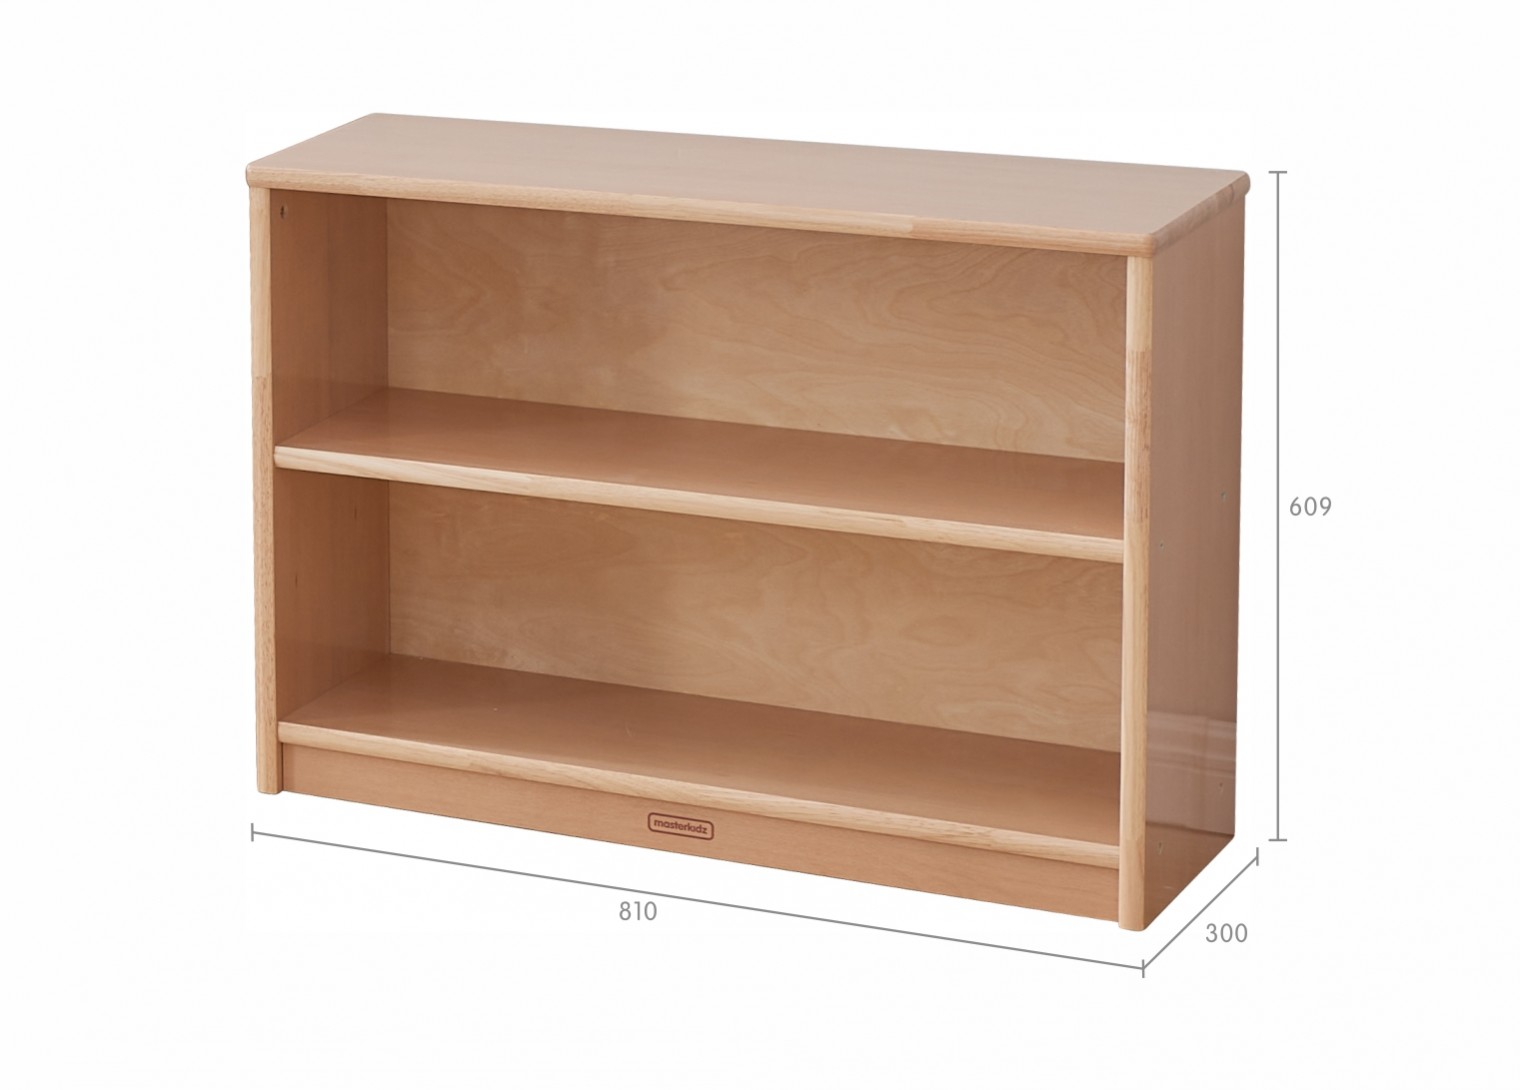 Forest School - 609H x 810L Wooden  Shelving Unit - Plywood Back